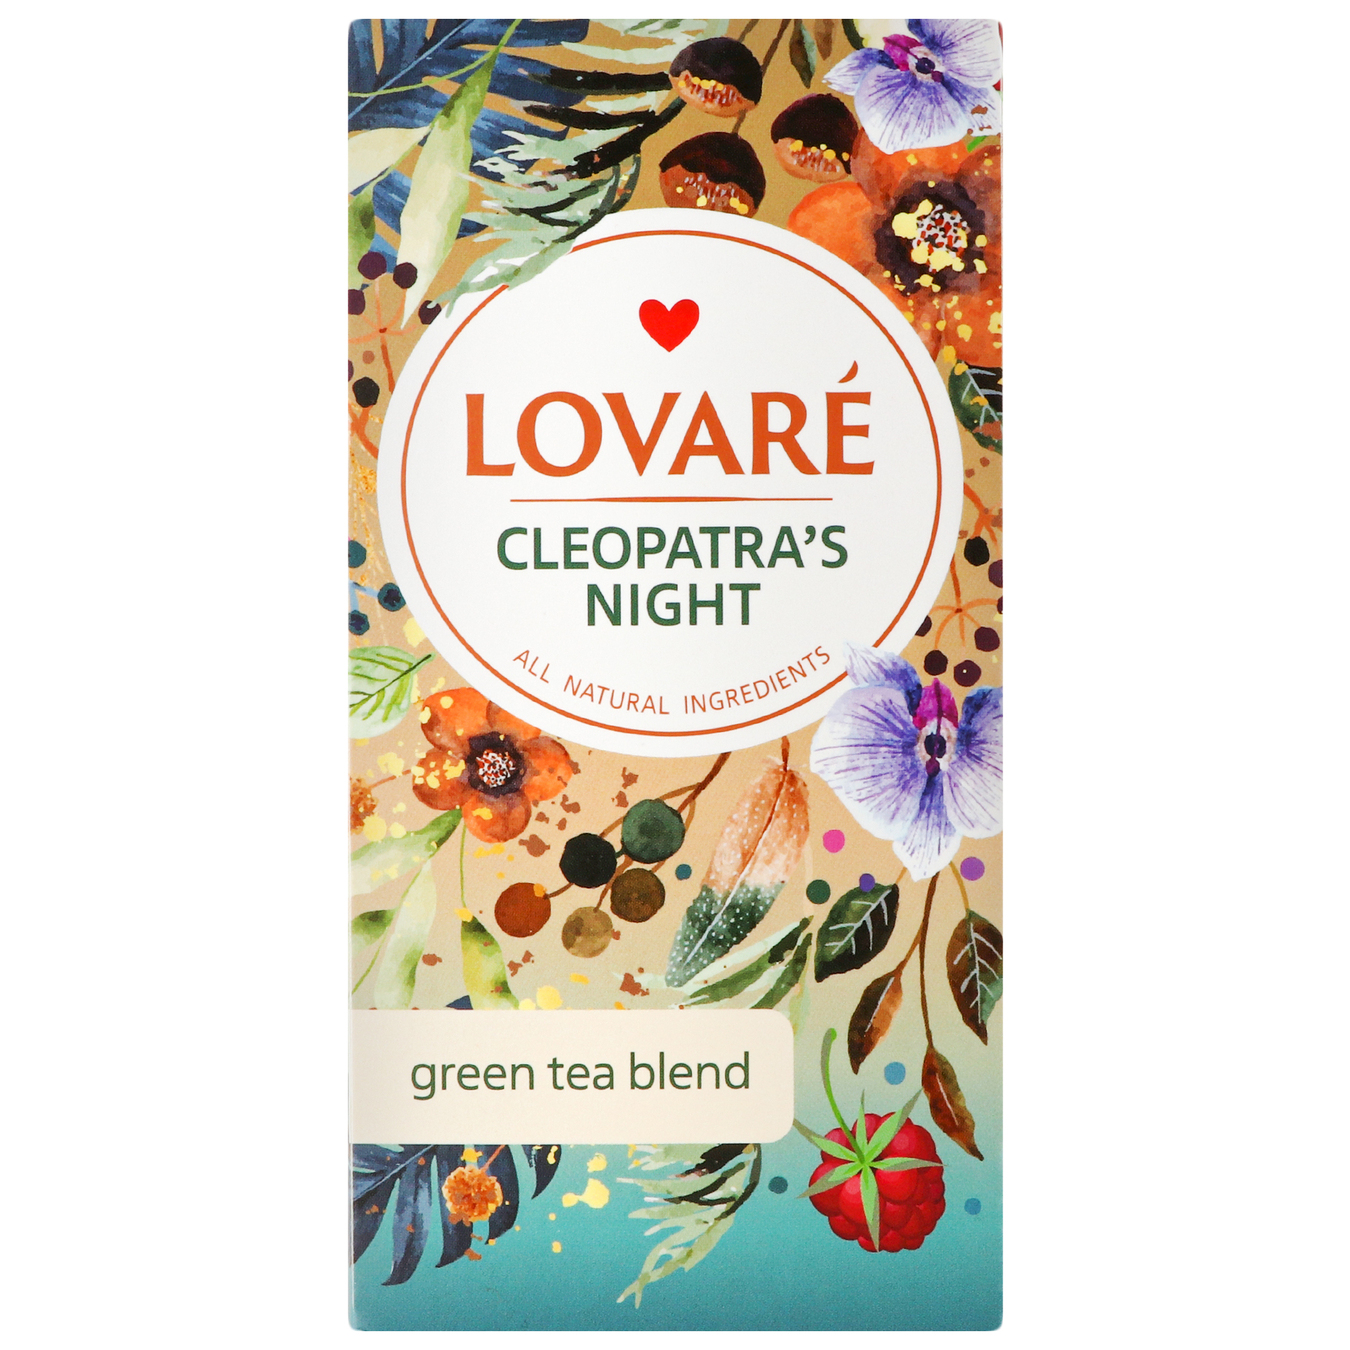 Lovare Cleopatra's Night Leaf Green Tea with Berries and Fruits 24pcs * 2g